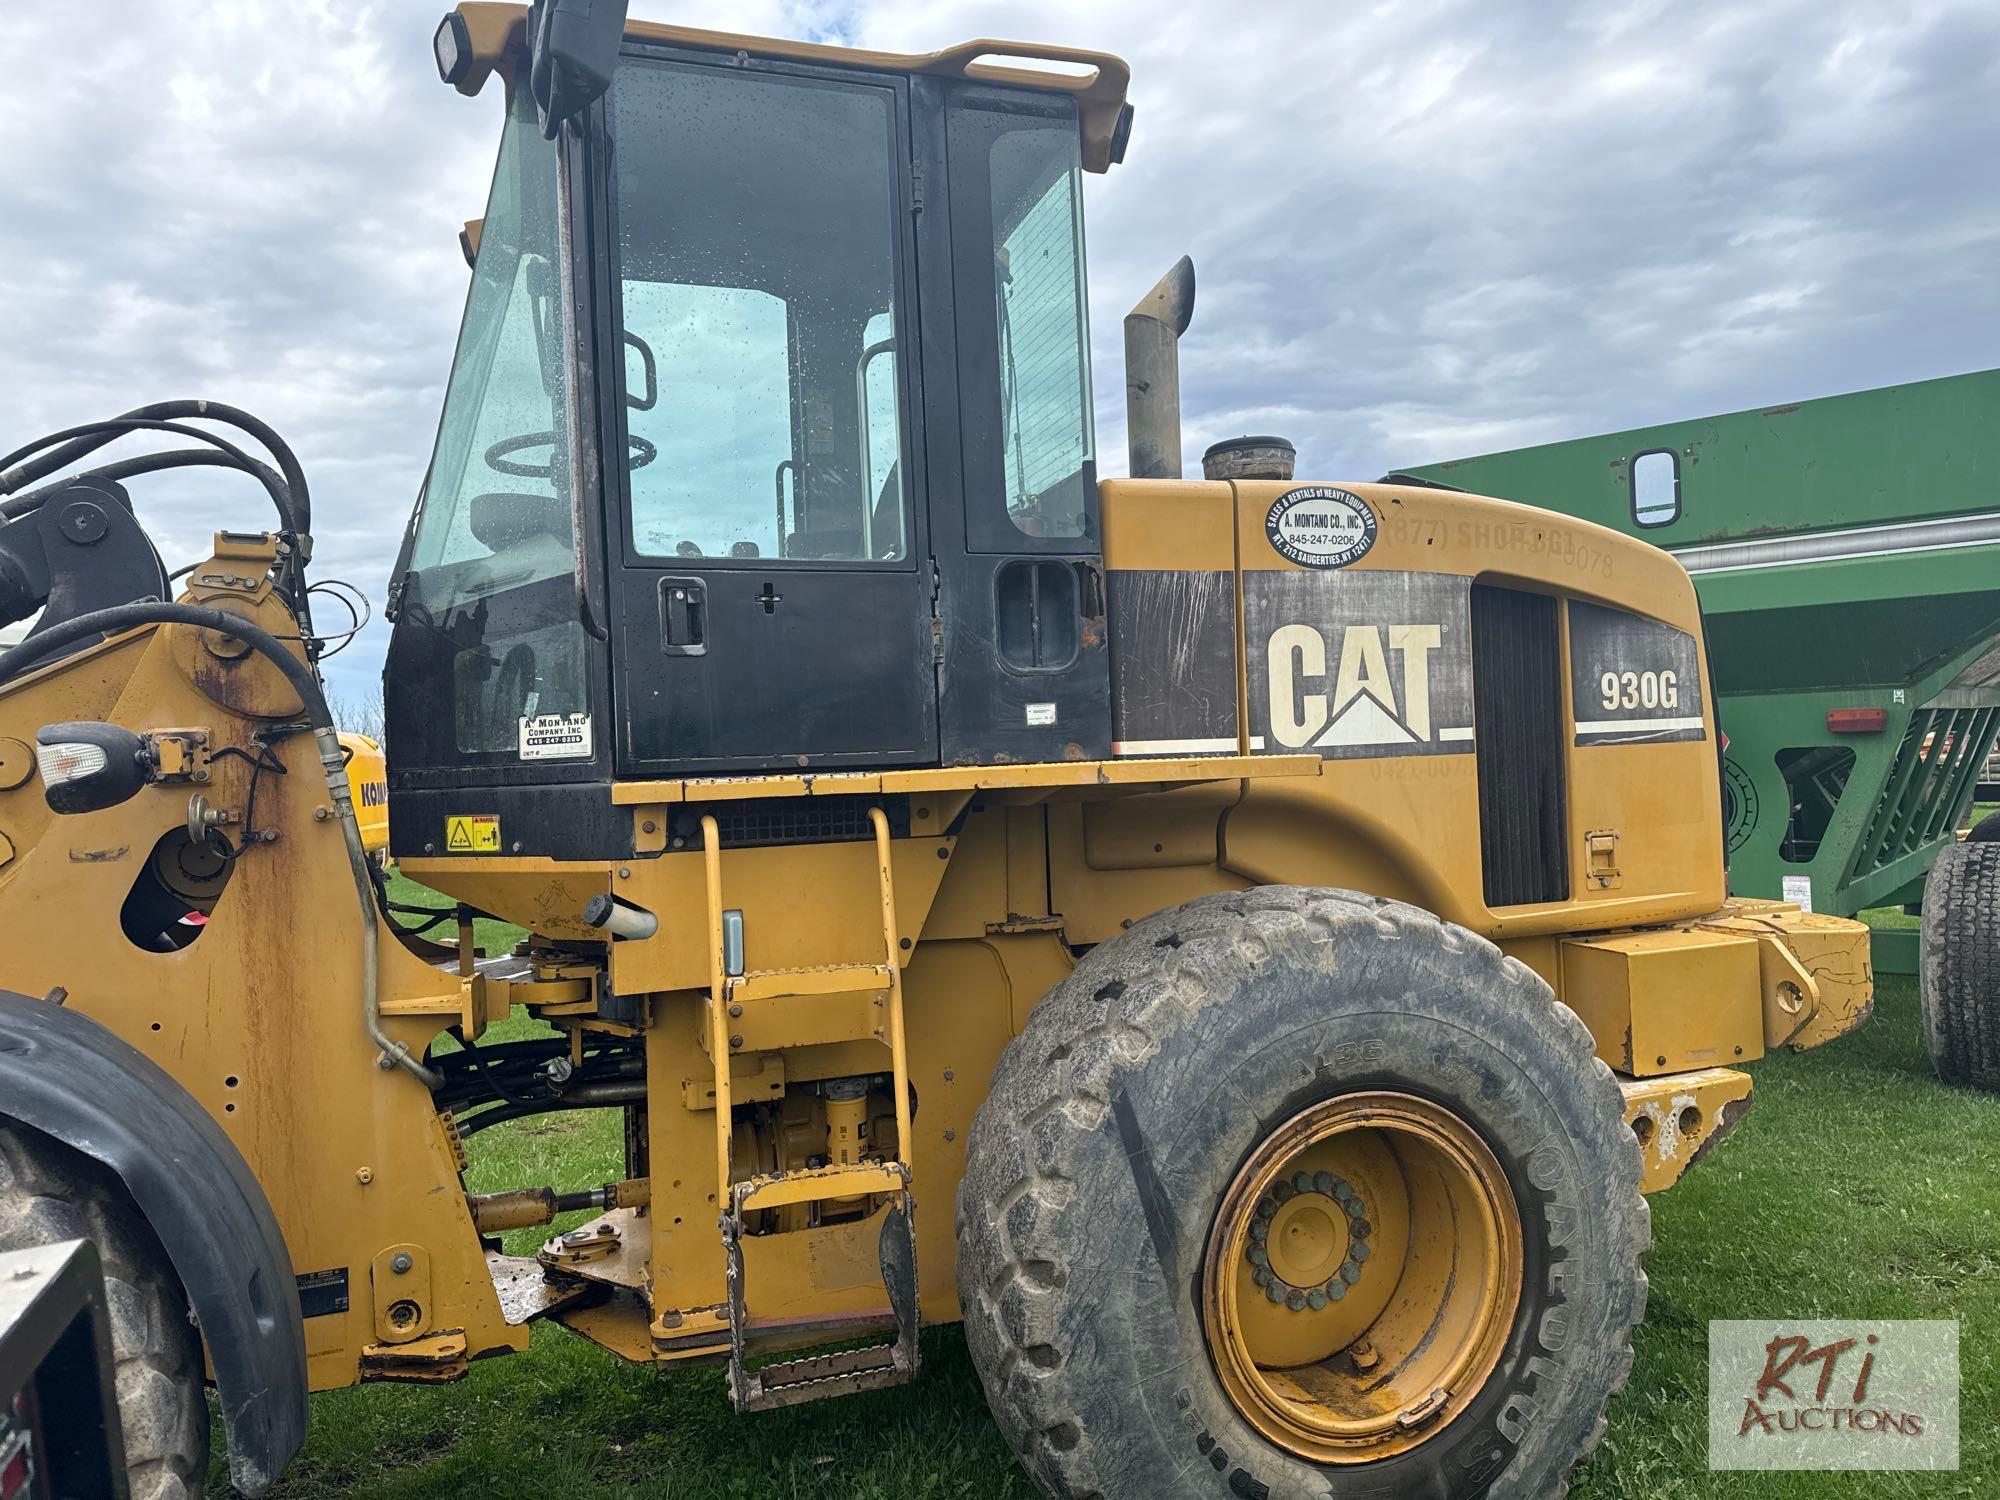 Caterpillar 930G rubber tired loader, cab, 20.5R 25 tires, GP bucket, hydraulic coupler, S/N